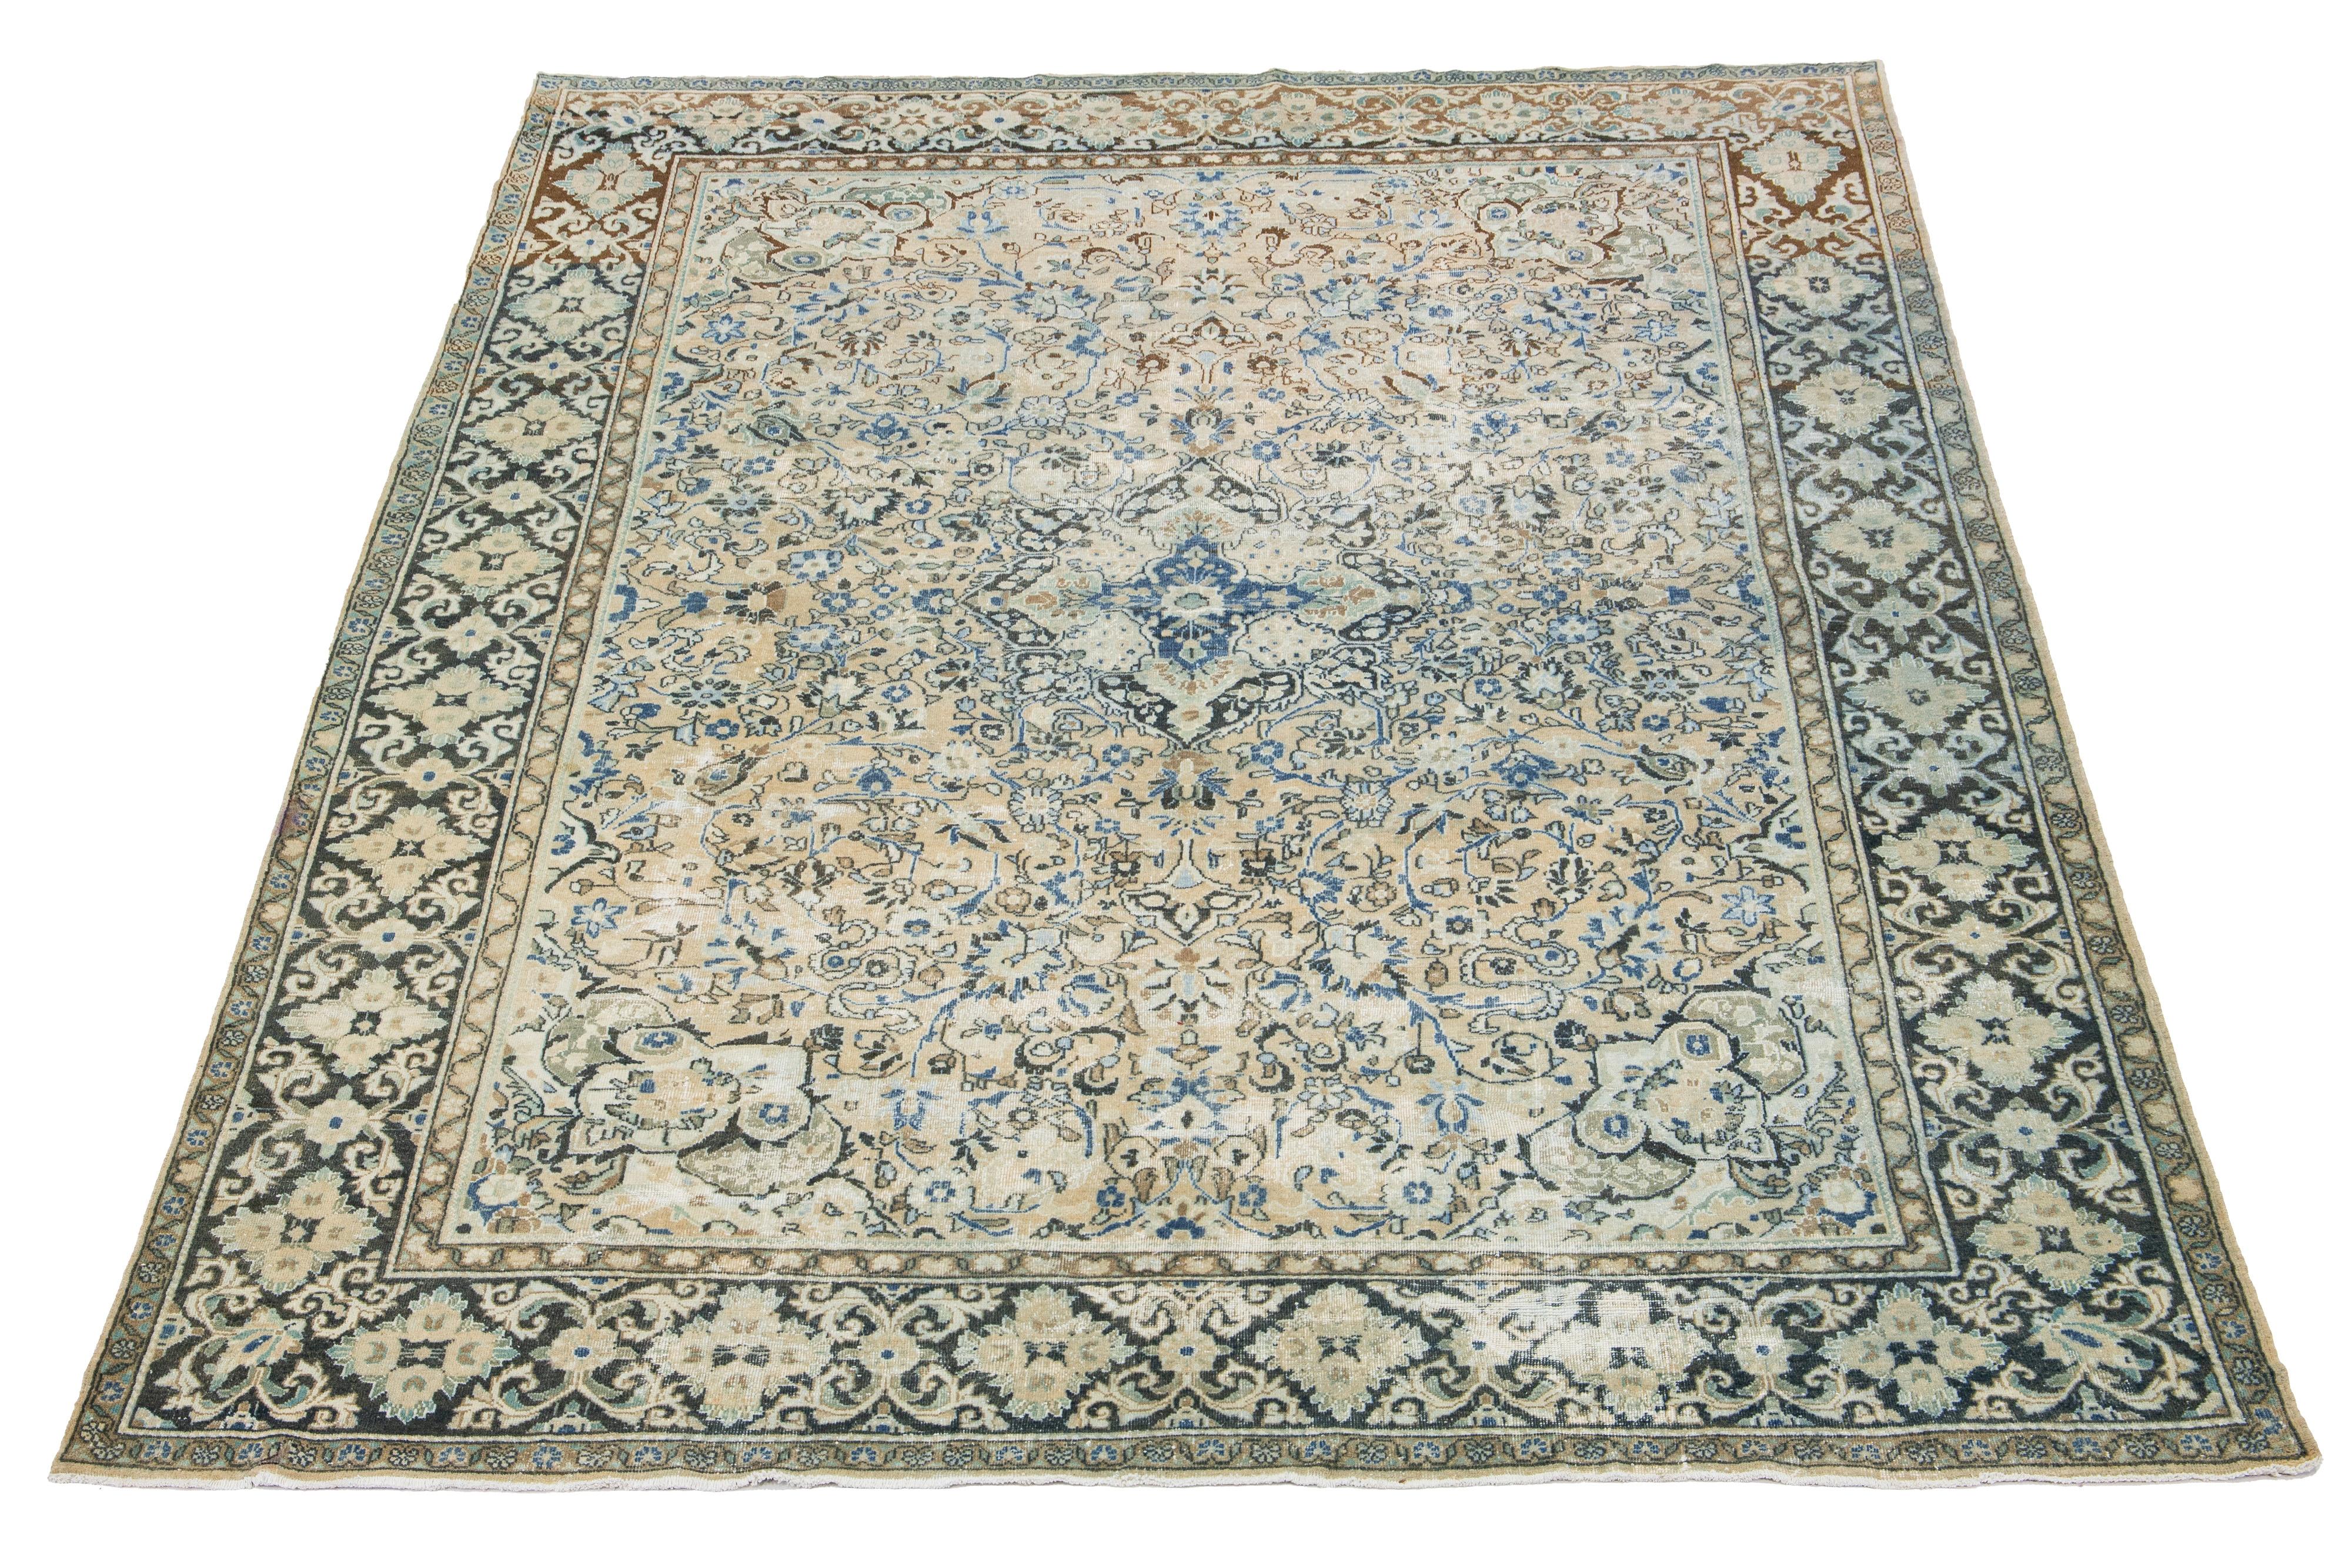 Beautiful Antique Mahal hand-knotted wool rug with a beige-colored field. The floral motif of this Persian rug is adorned with blue and brown hues.

This rug measures 9'10